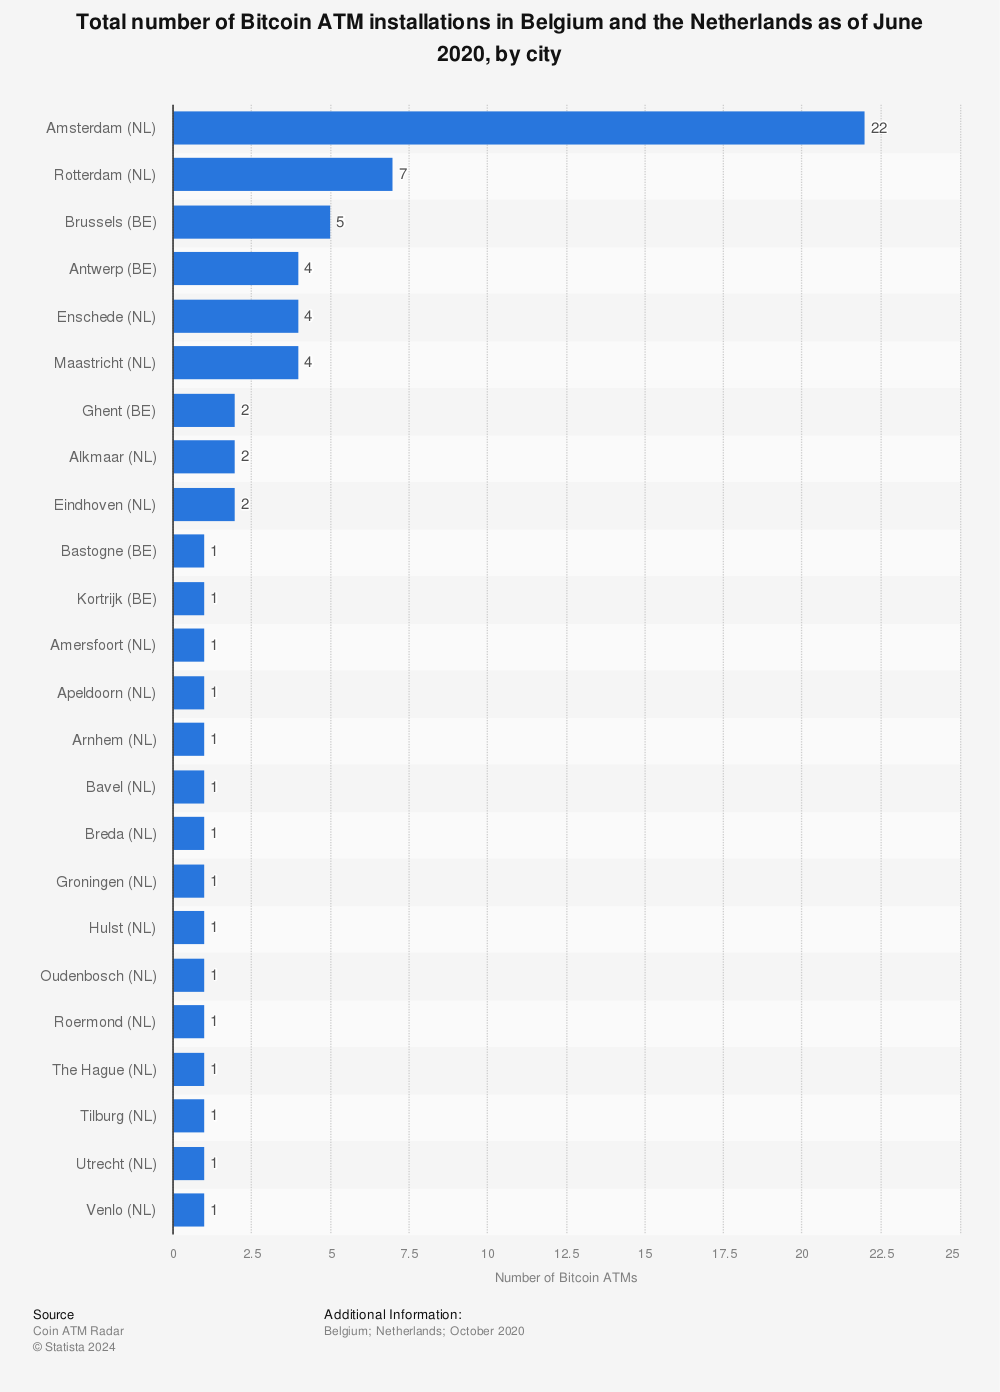 Statistic: Total number of Bitcoin ATM installations in Belgium and the Netherlands as of June 2020, by city | Statista